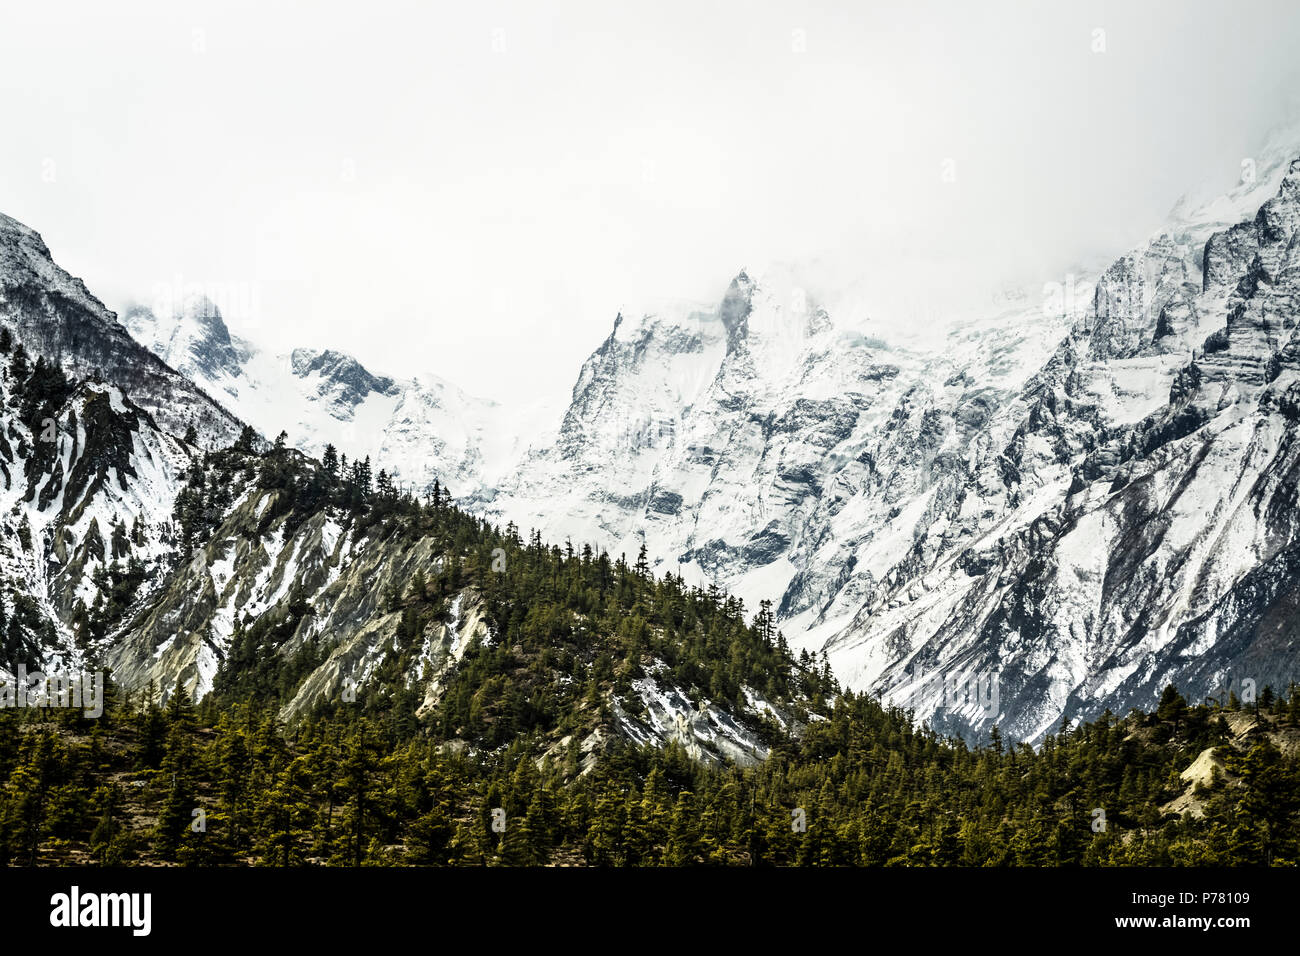 Pine trees against a snow capped mountain, Annapurna Circuit, Nepal Stock Photo